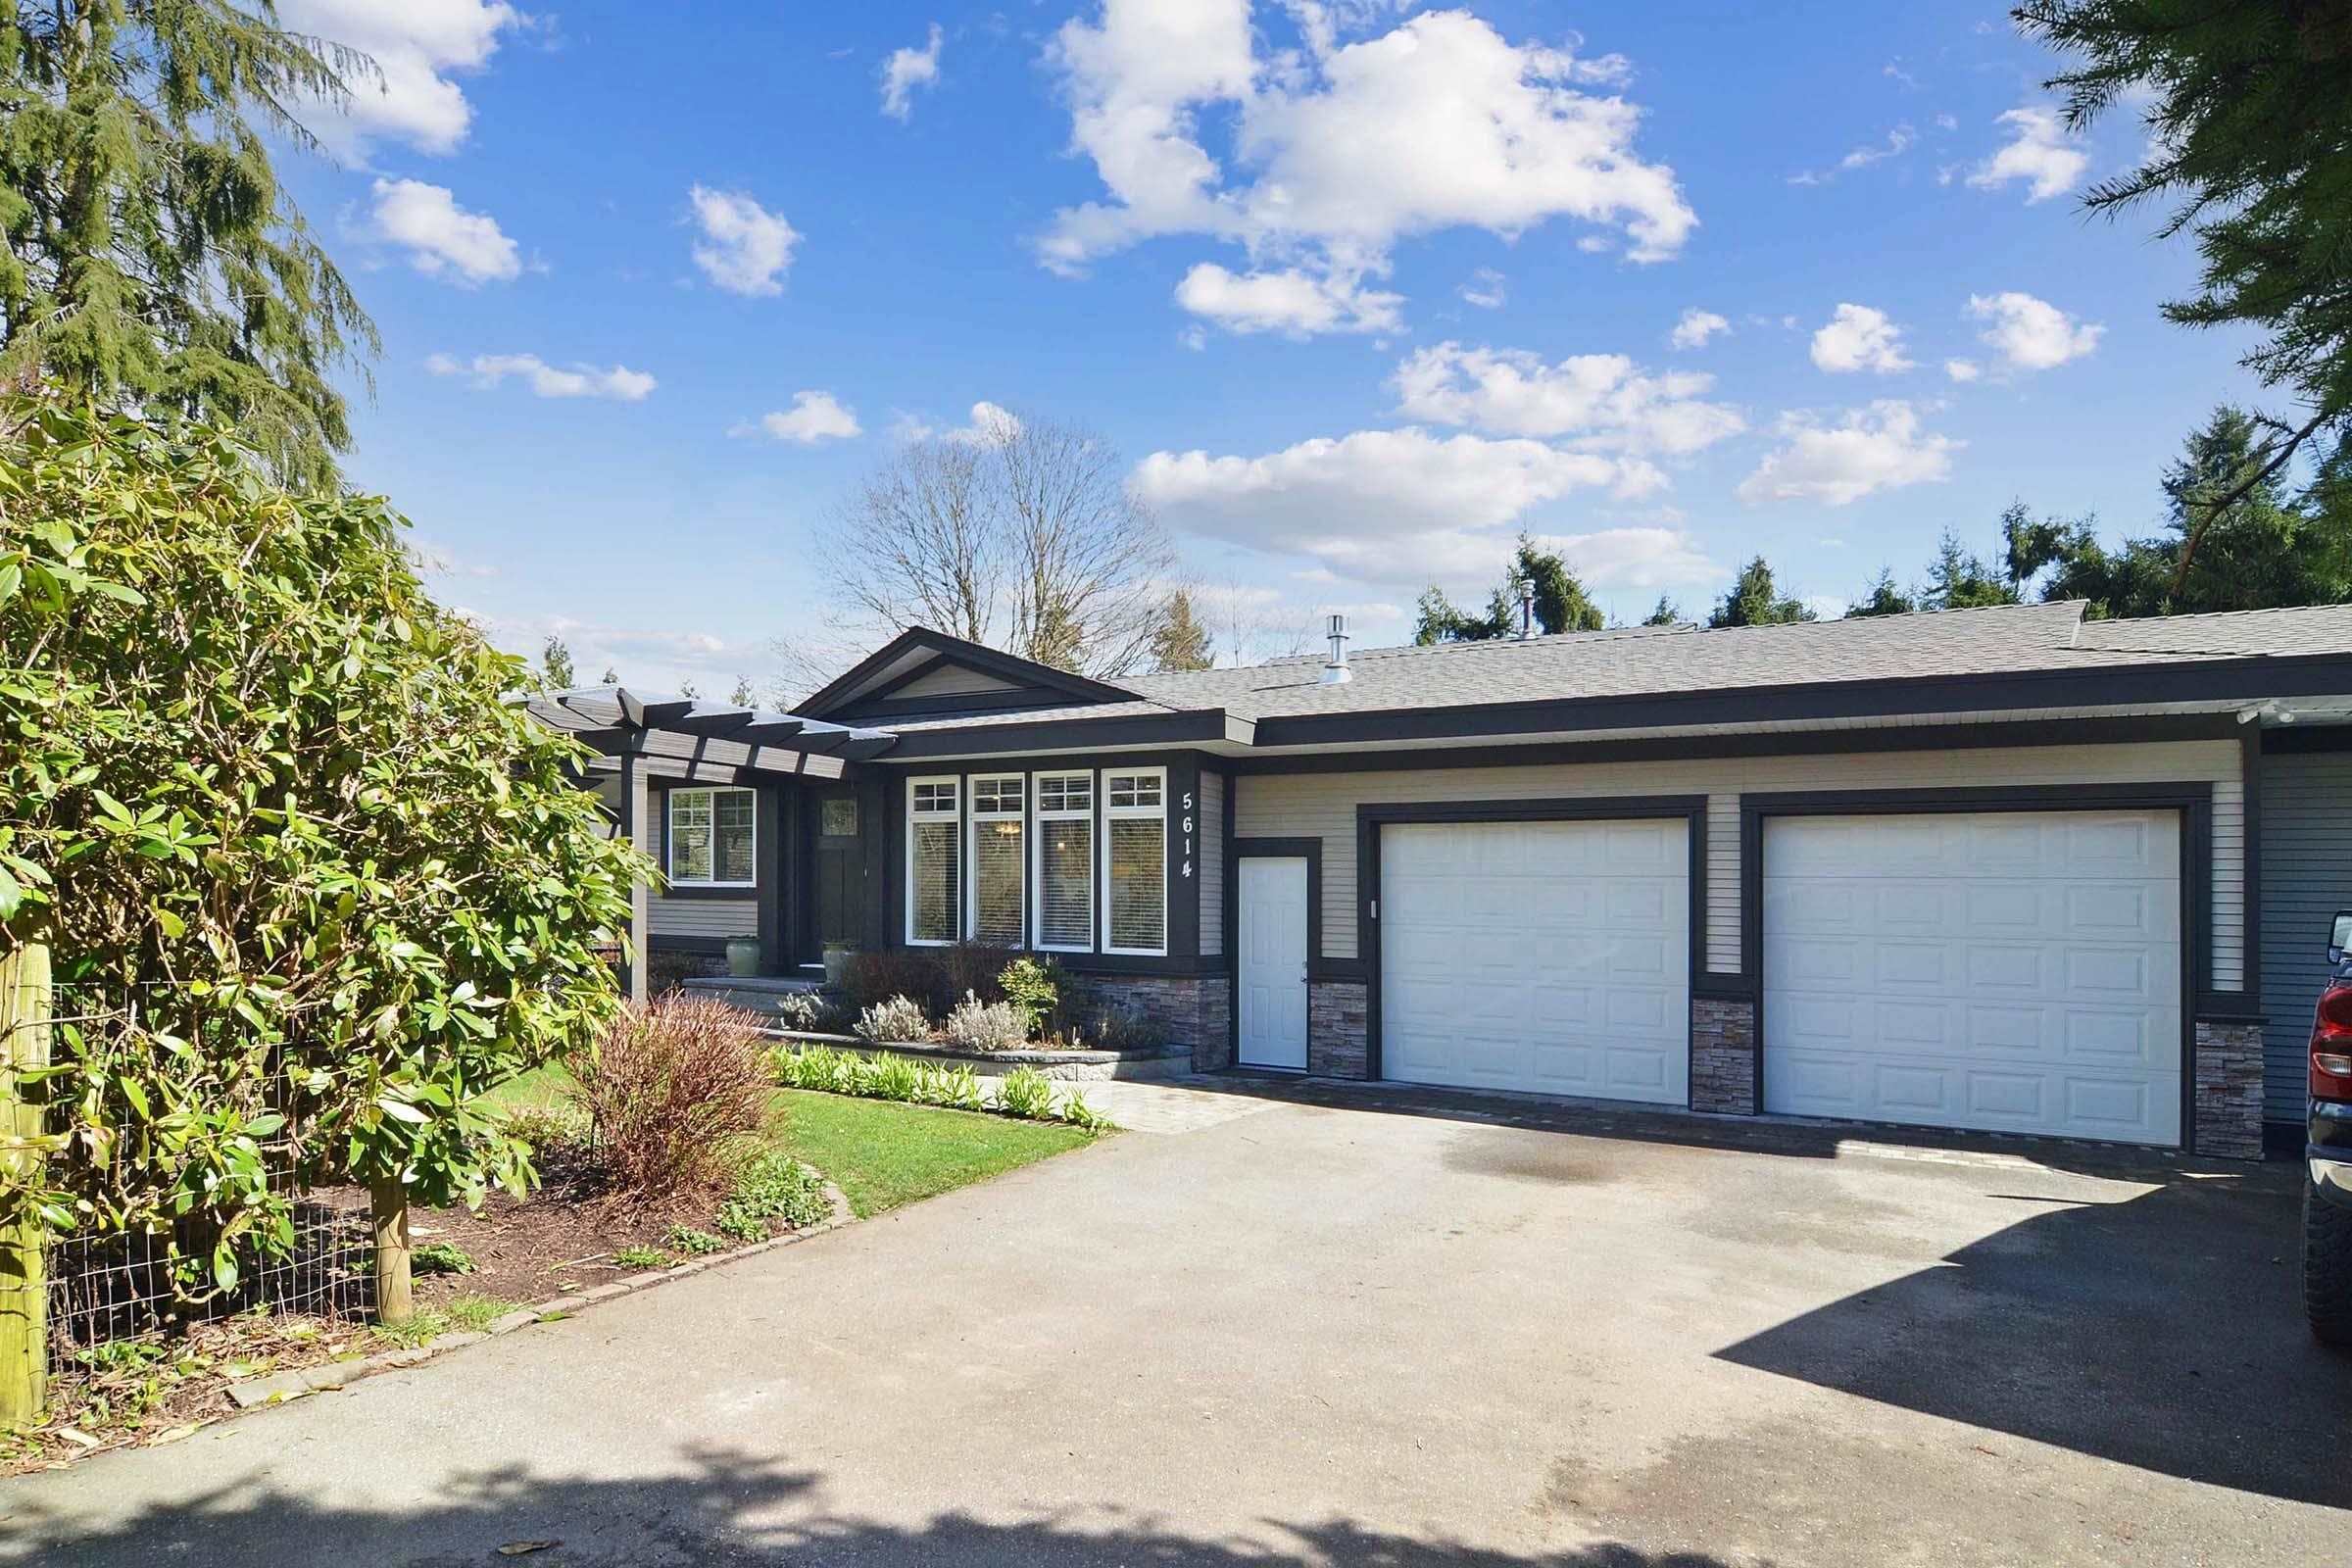 New property listed in Salmon River, Langley